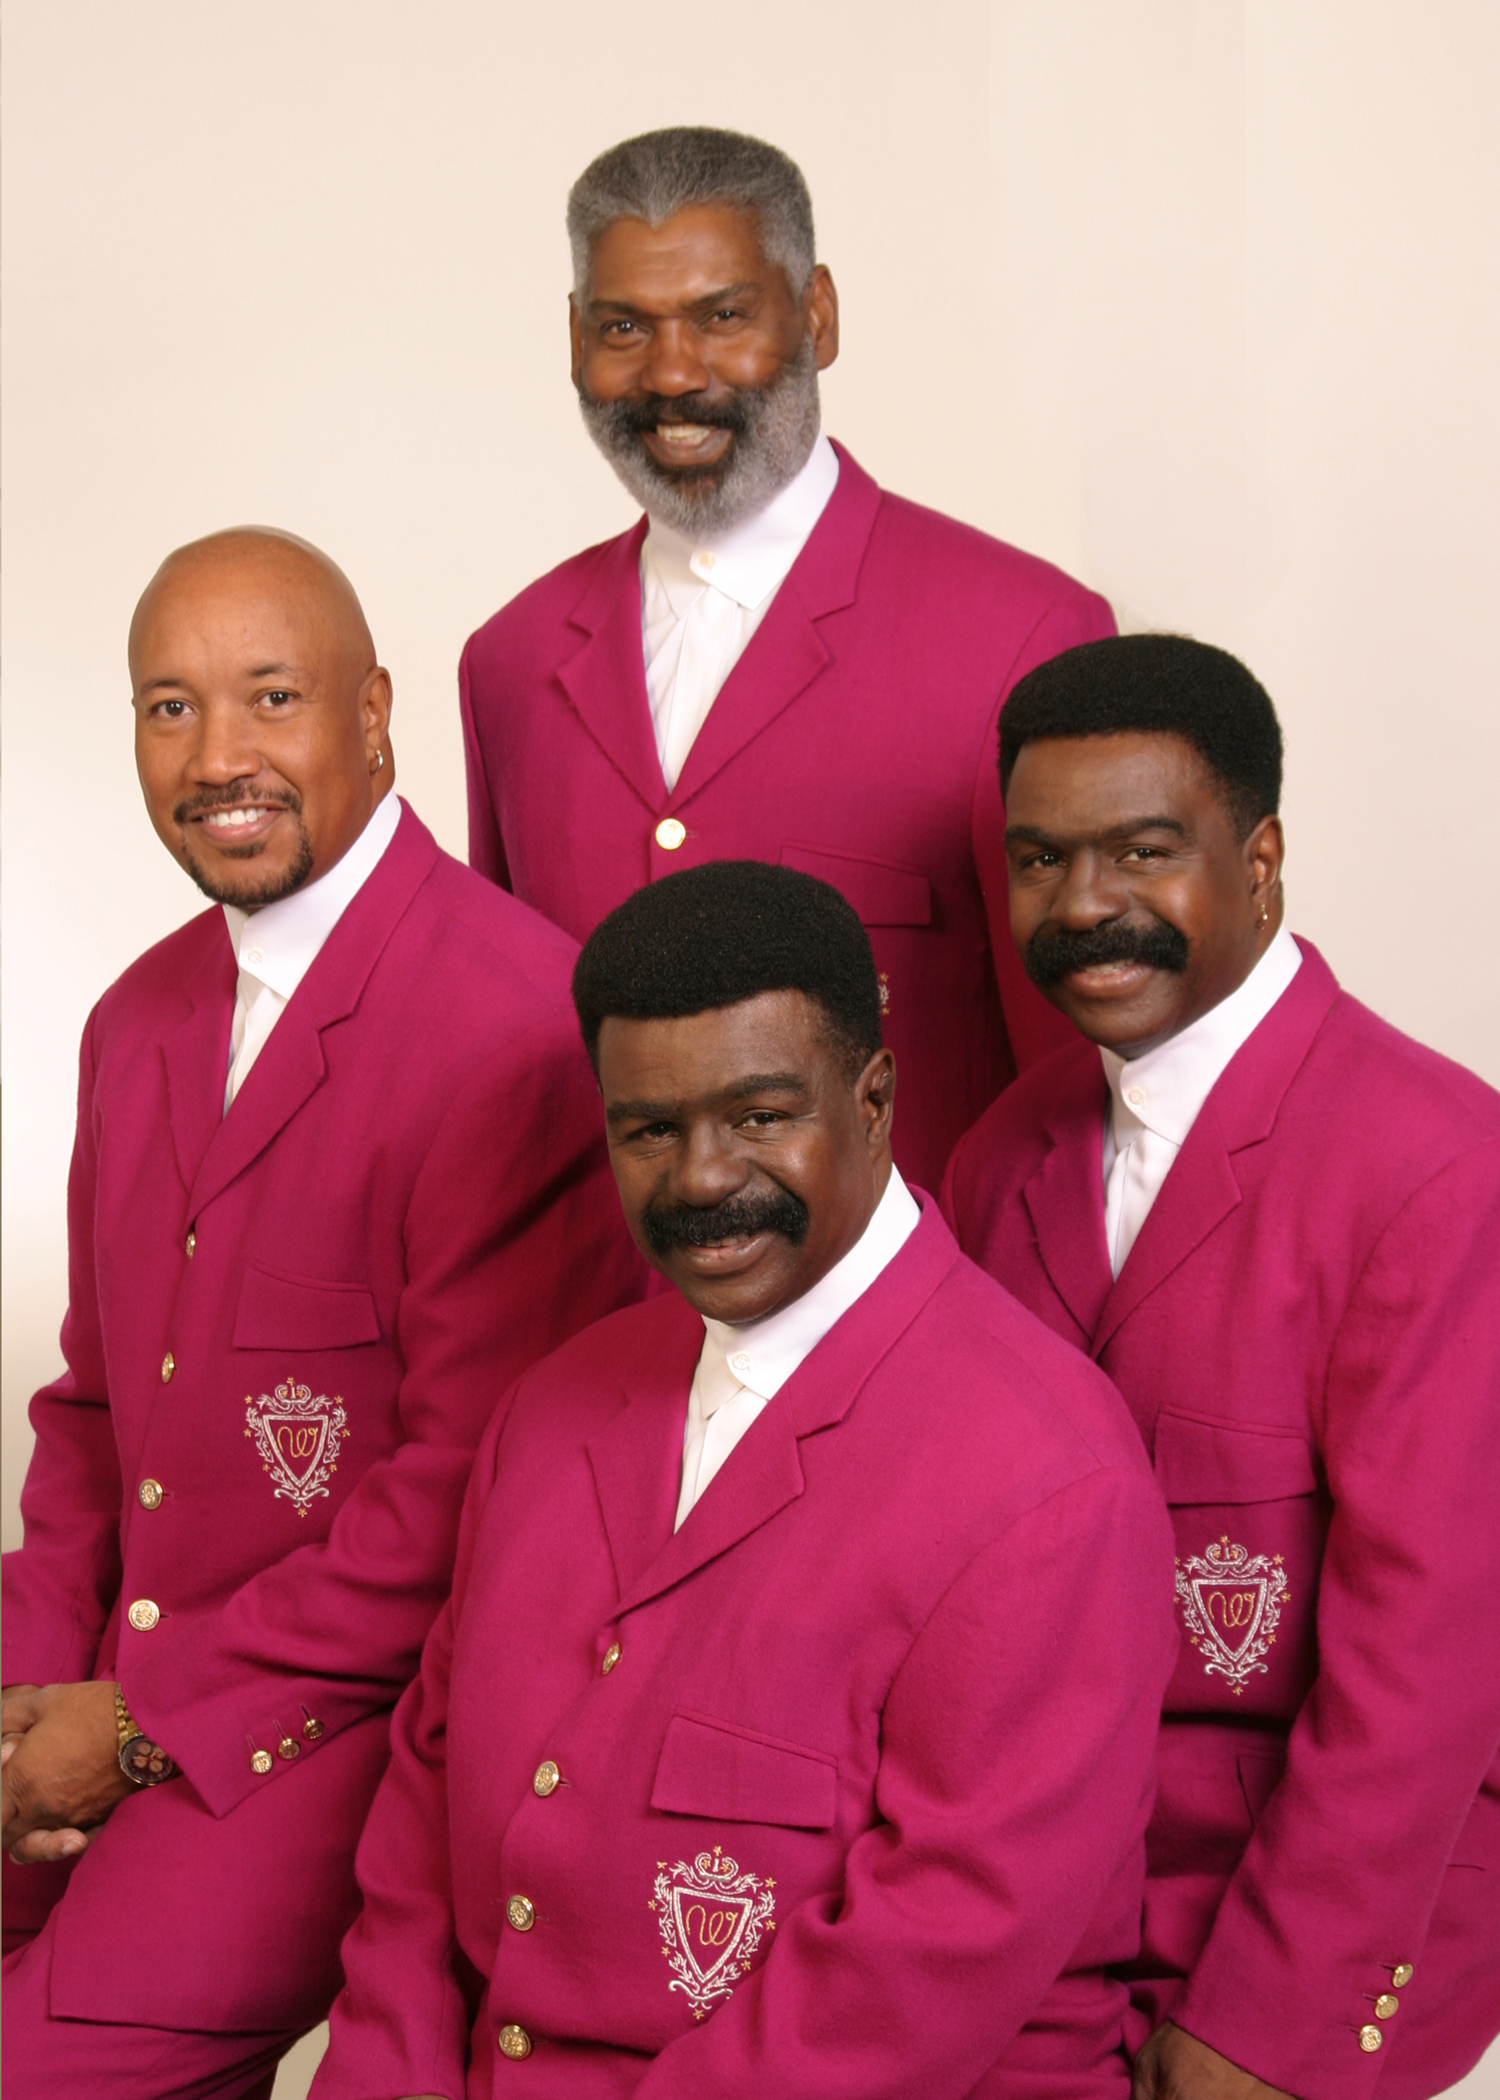 The Whispers play the NY metro area in The Mother's Day Weekend Concert on May 9 and 10.